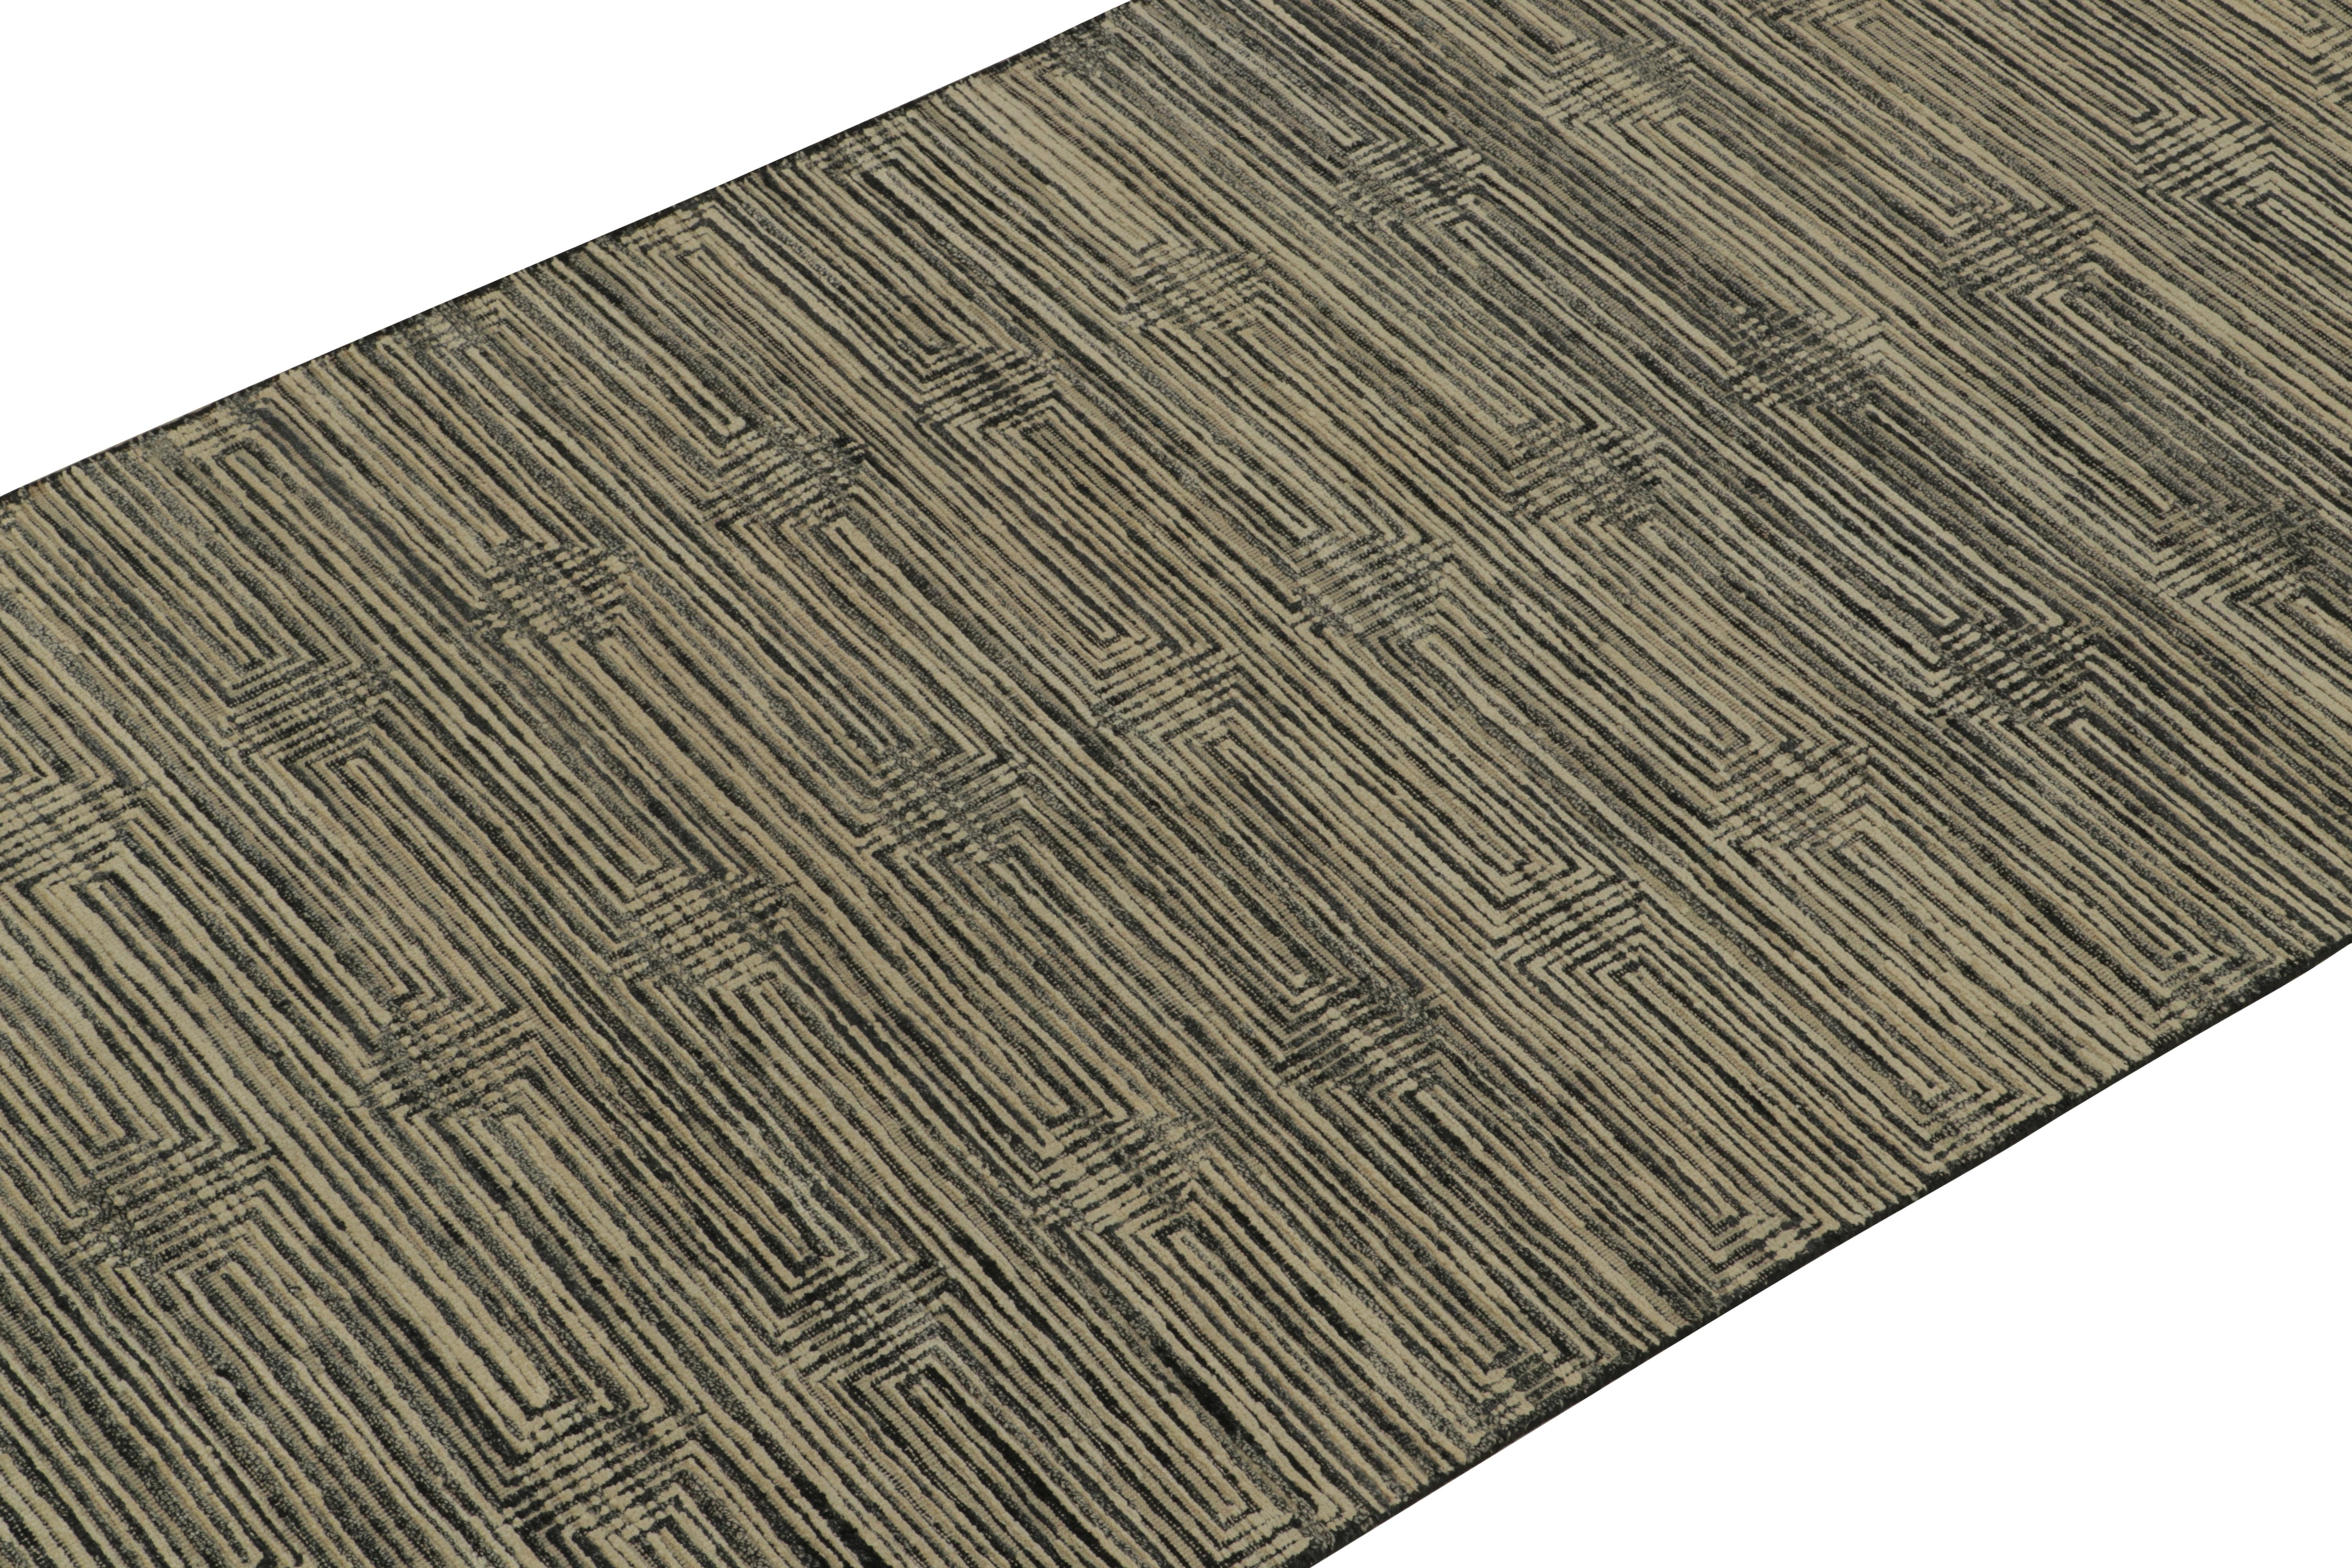 Indian Rug & Kilim’s Contemporary Rug in Beige, Blac and Blue Striae, Geometric Pattern For Sale